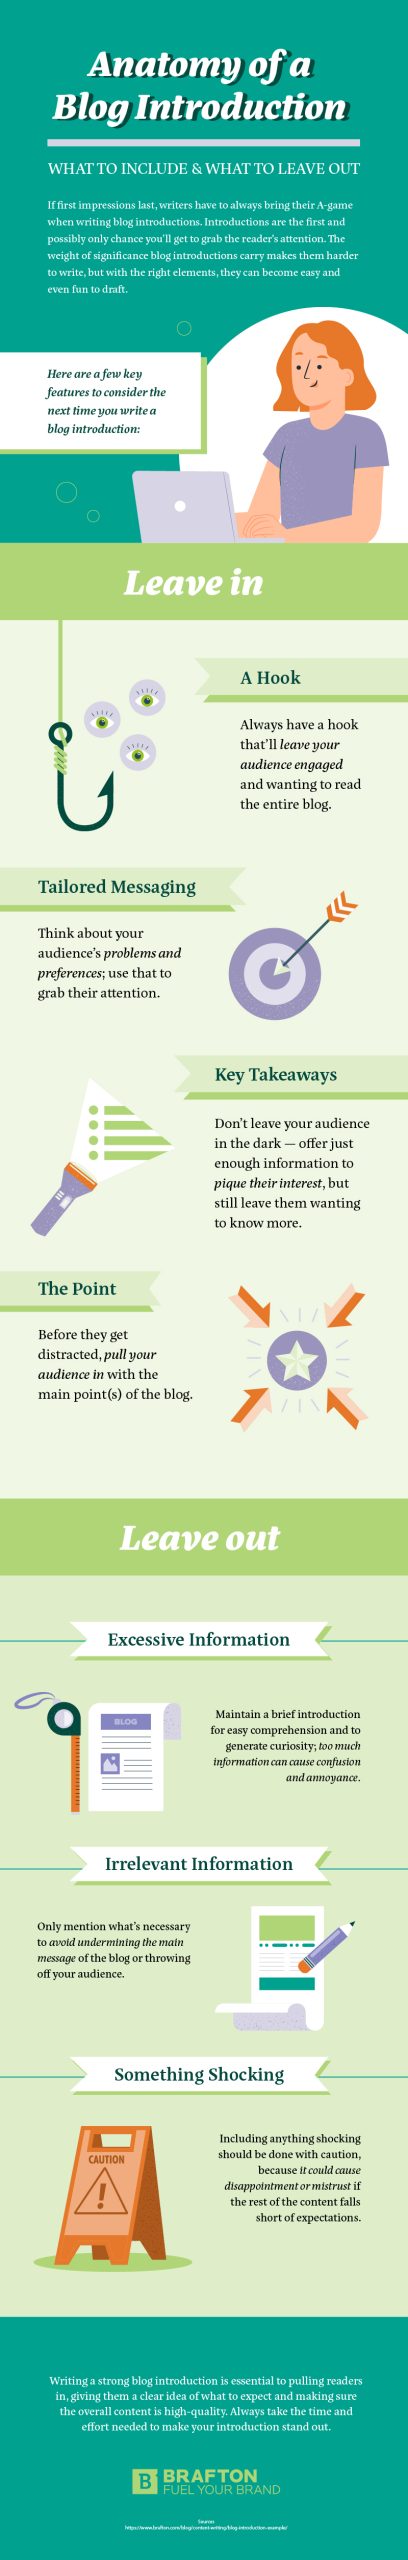 Anatomy of a Blog Introduction infographic